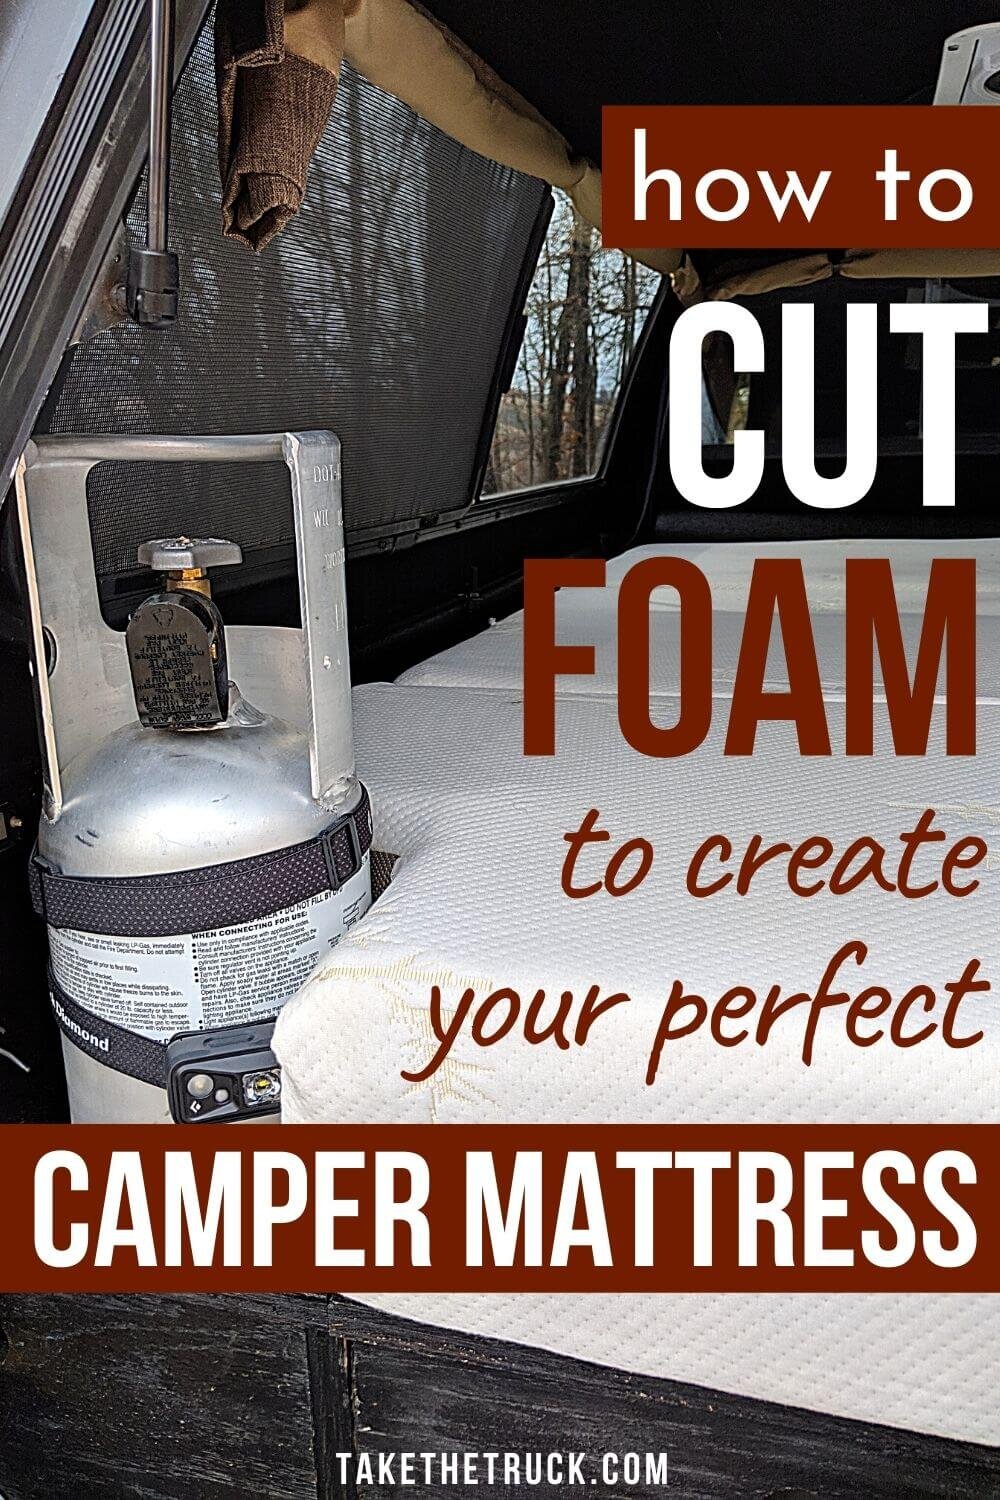 If you want to know how to cut foam, read this post. Cutting foam or memory foam as a DIY project at home is really easy to do! We made the perfect camping mattress by knowing how to cut foam.